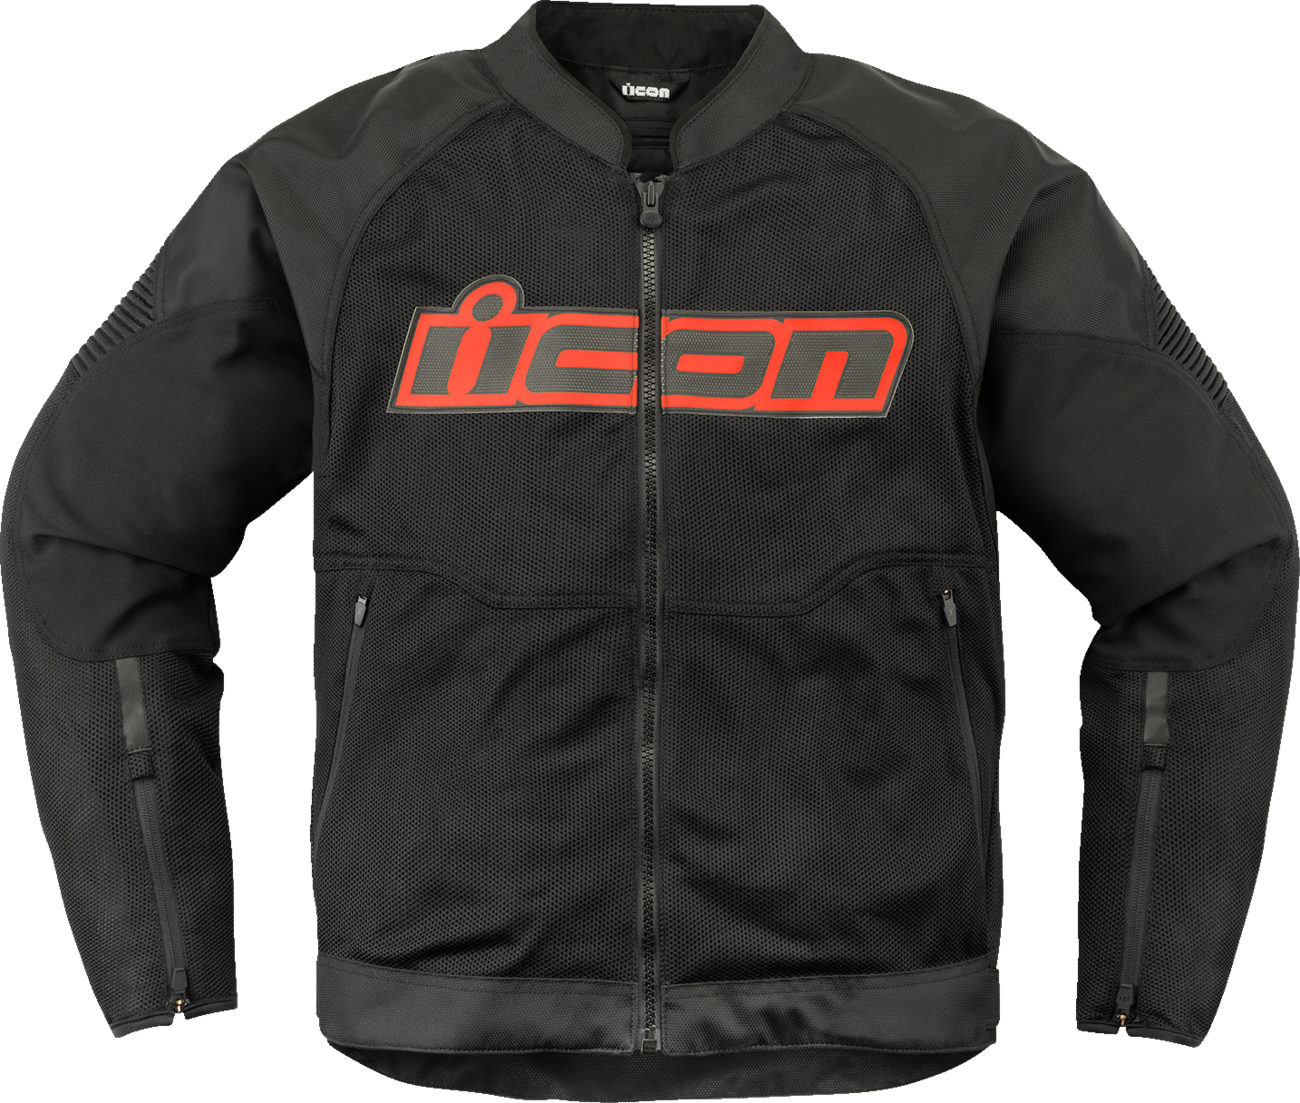 ICON Overlord3 Mesh™ CE Jacket - Slayer - XL 2820-6745